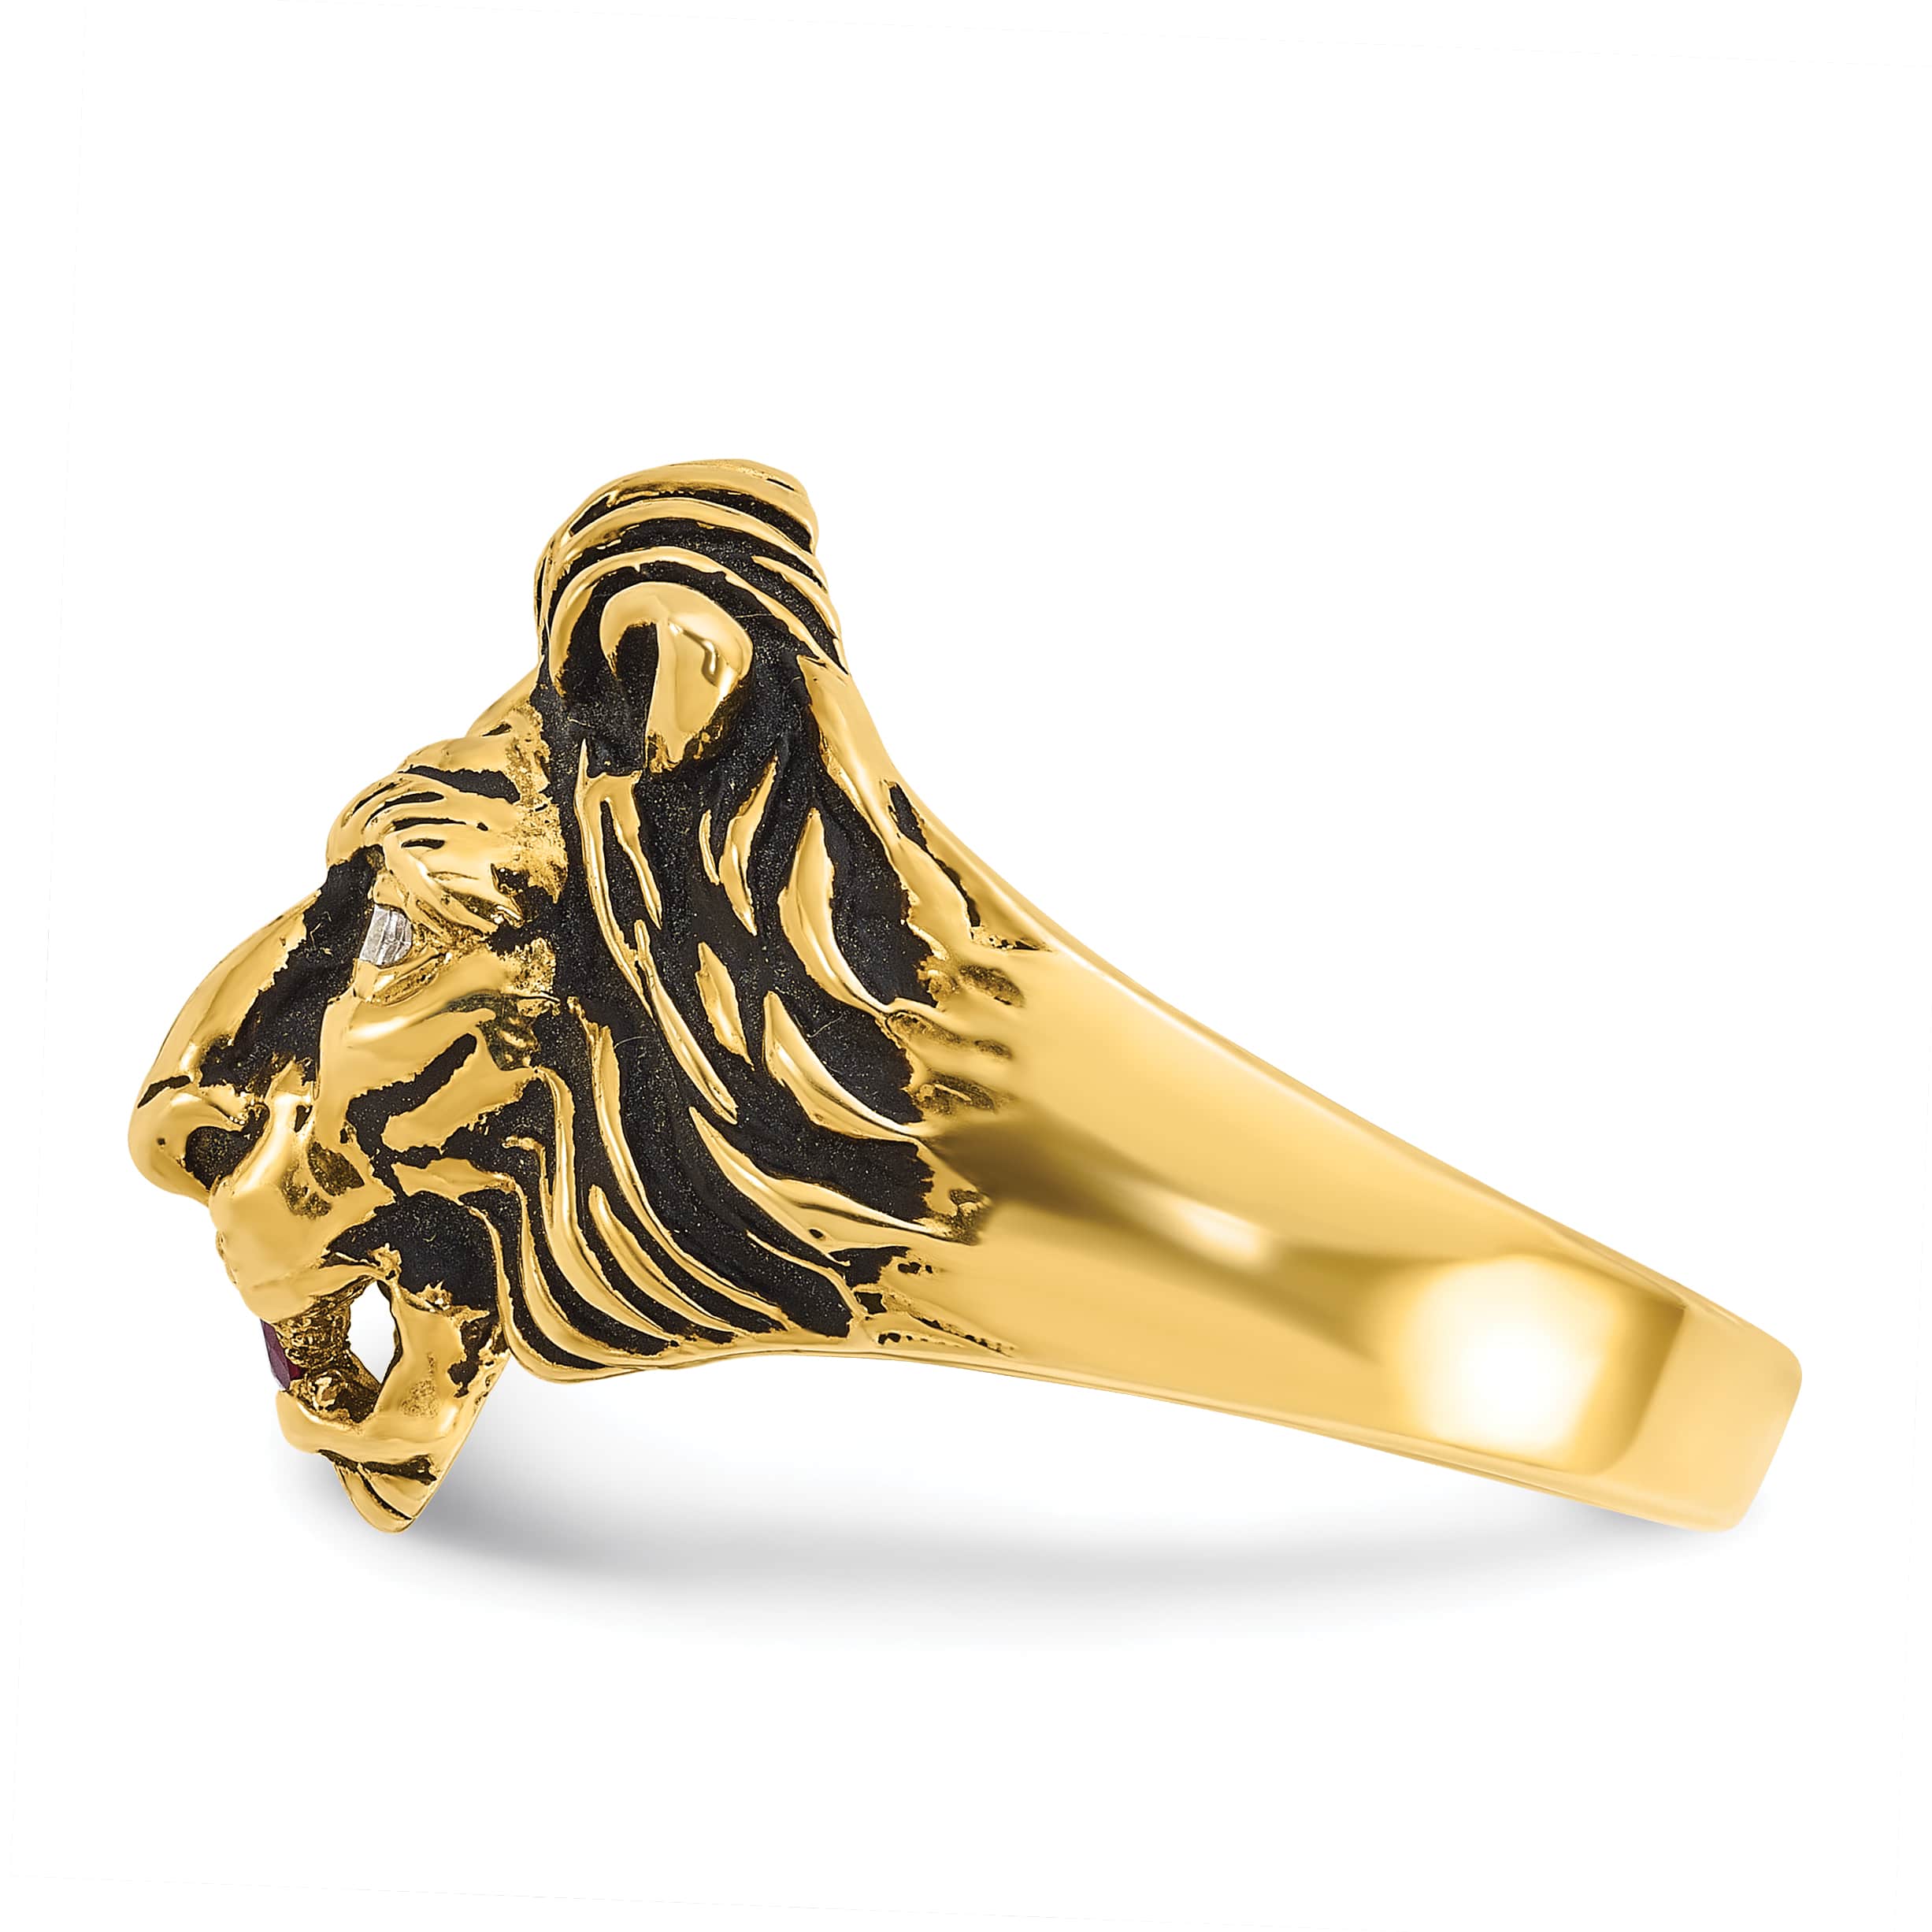 gold rings for me| gold rings|gold casting rings|gold animal rings|rings  for men|men ring online|gold rings online|gold lion rin